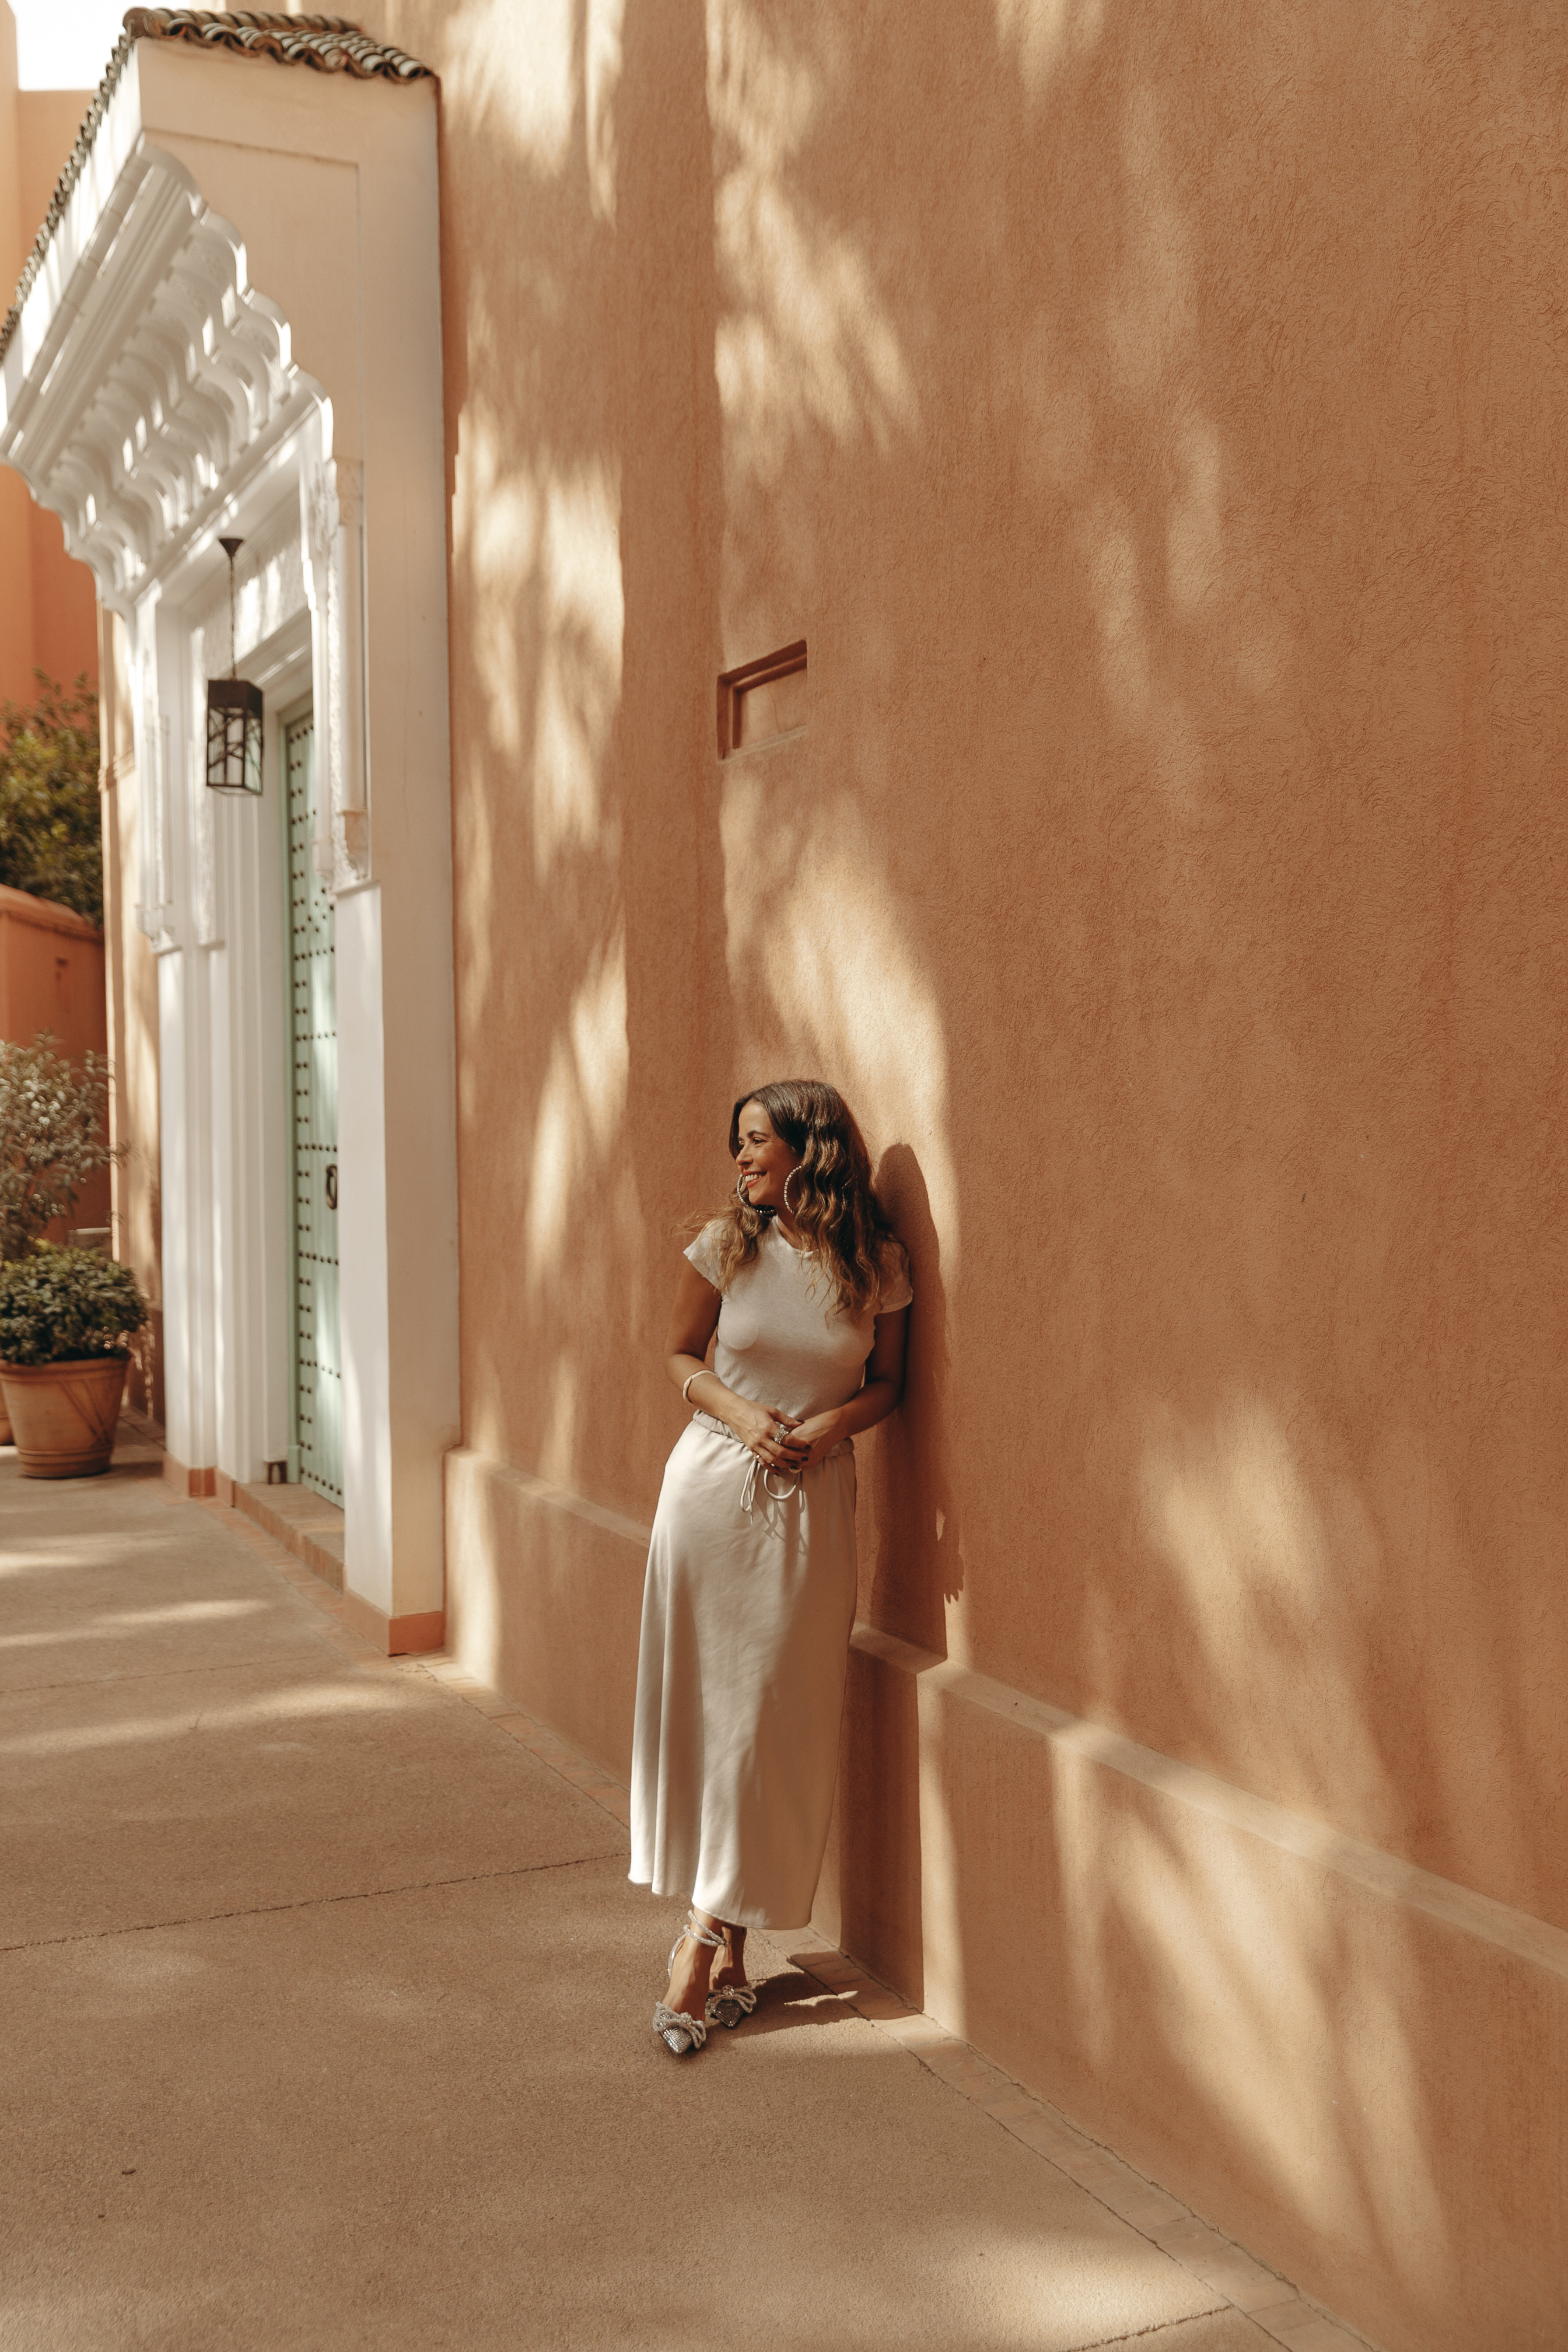 Sara from Collage Vintage wearing a satin long skirt, Mach & Mach crystal embellished pumps and maxi hoops in a palm tree garden in Marrakech